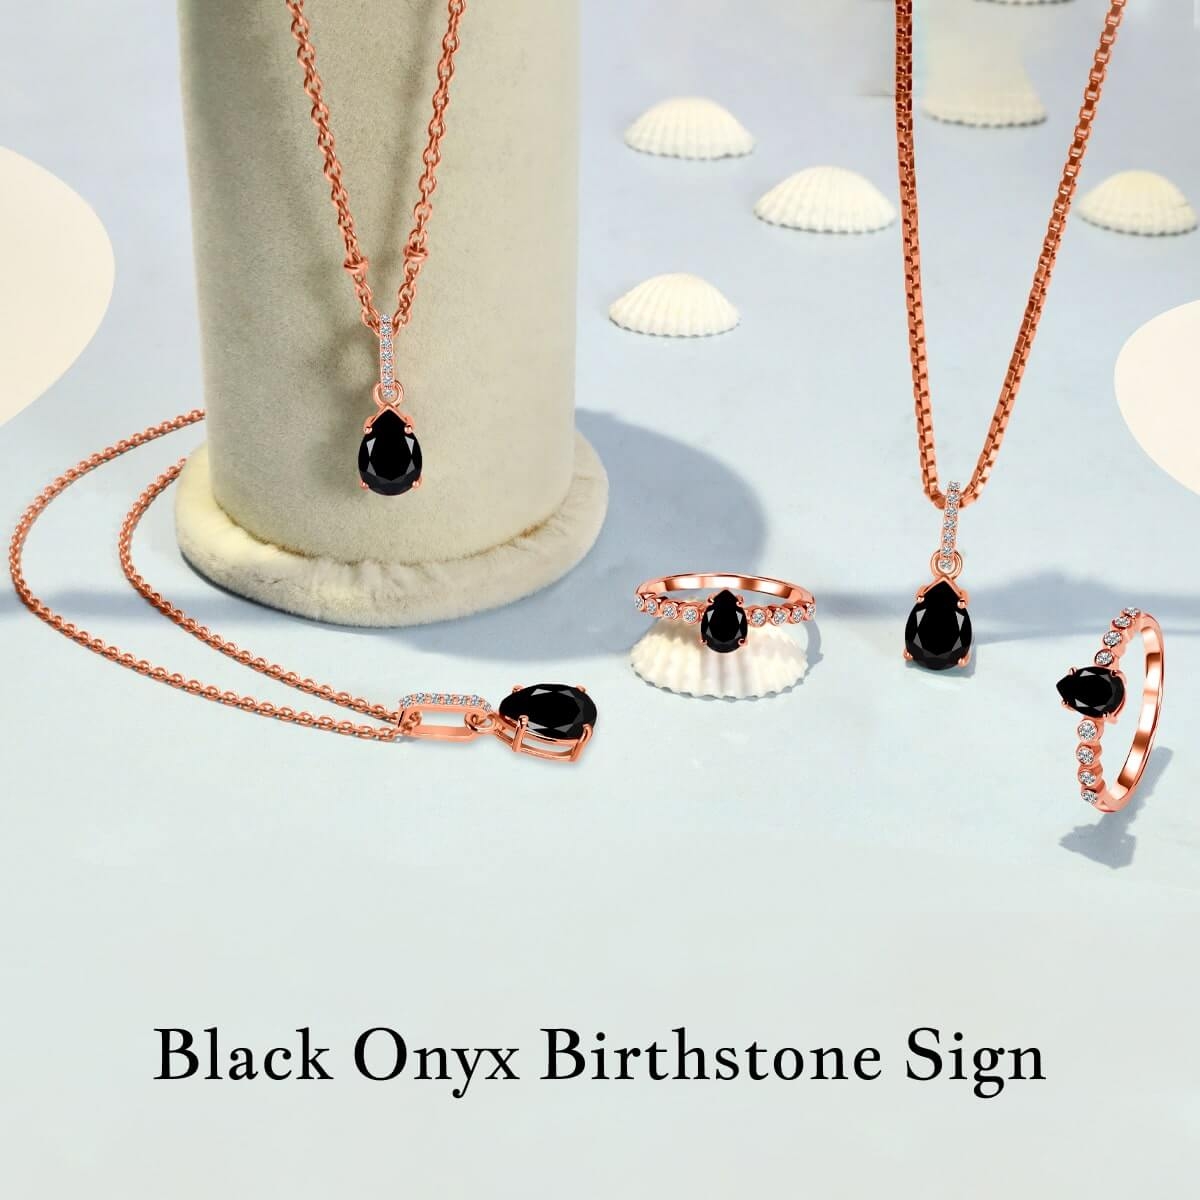 Black Onyx is Associated With Which Zodiac Sign